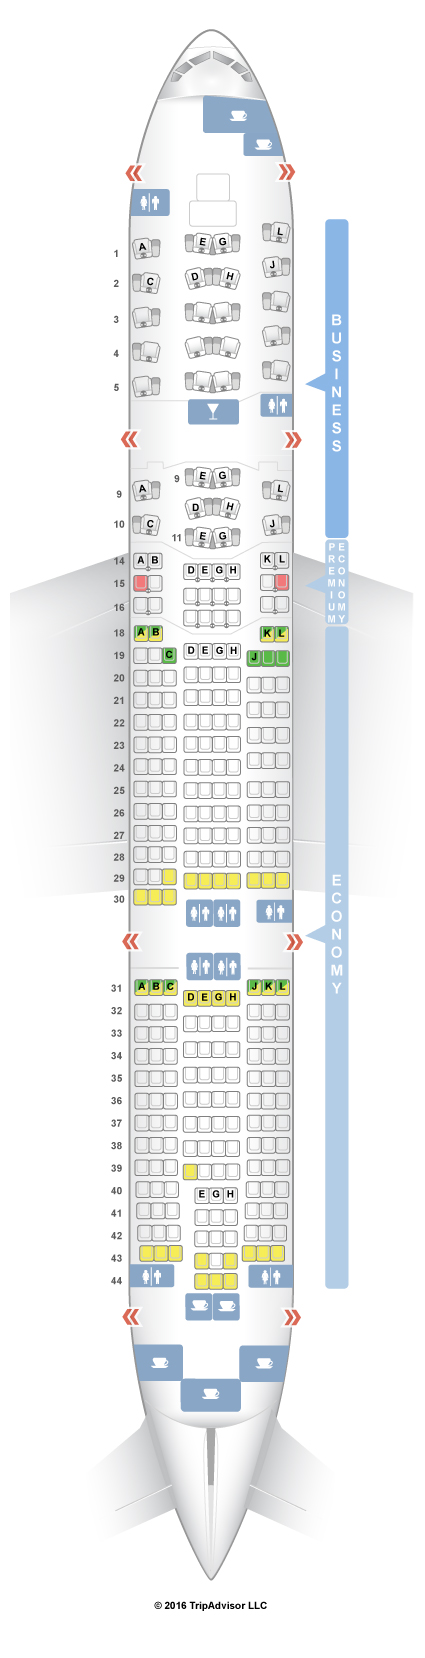 Boeing 777 222 Seating Chart